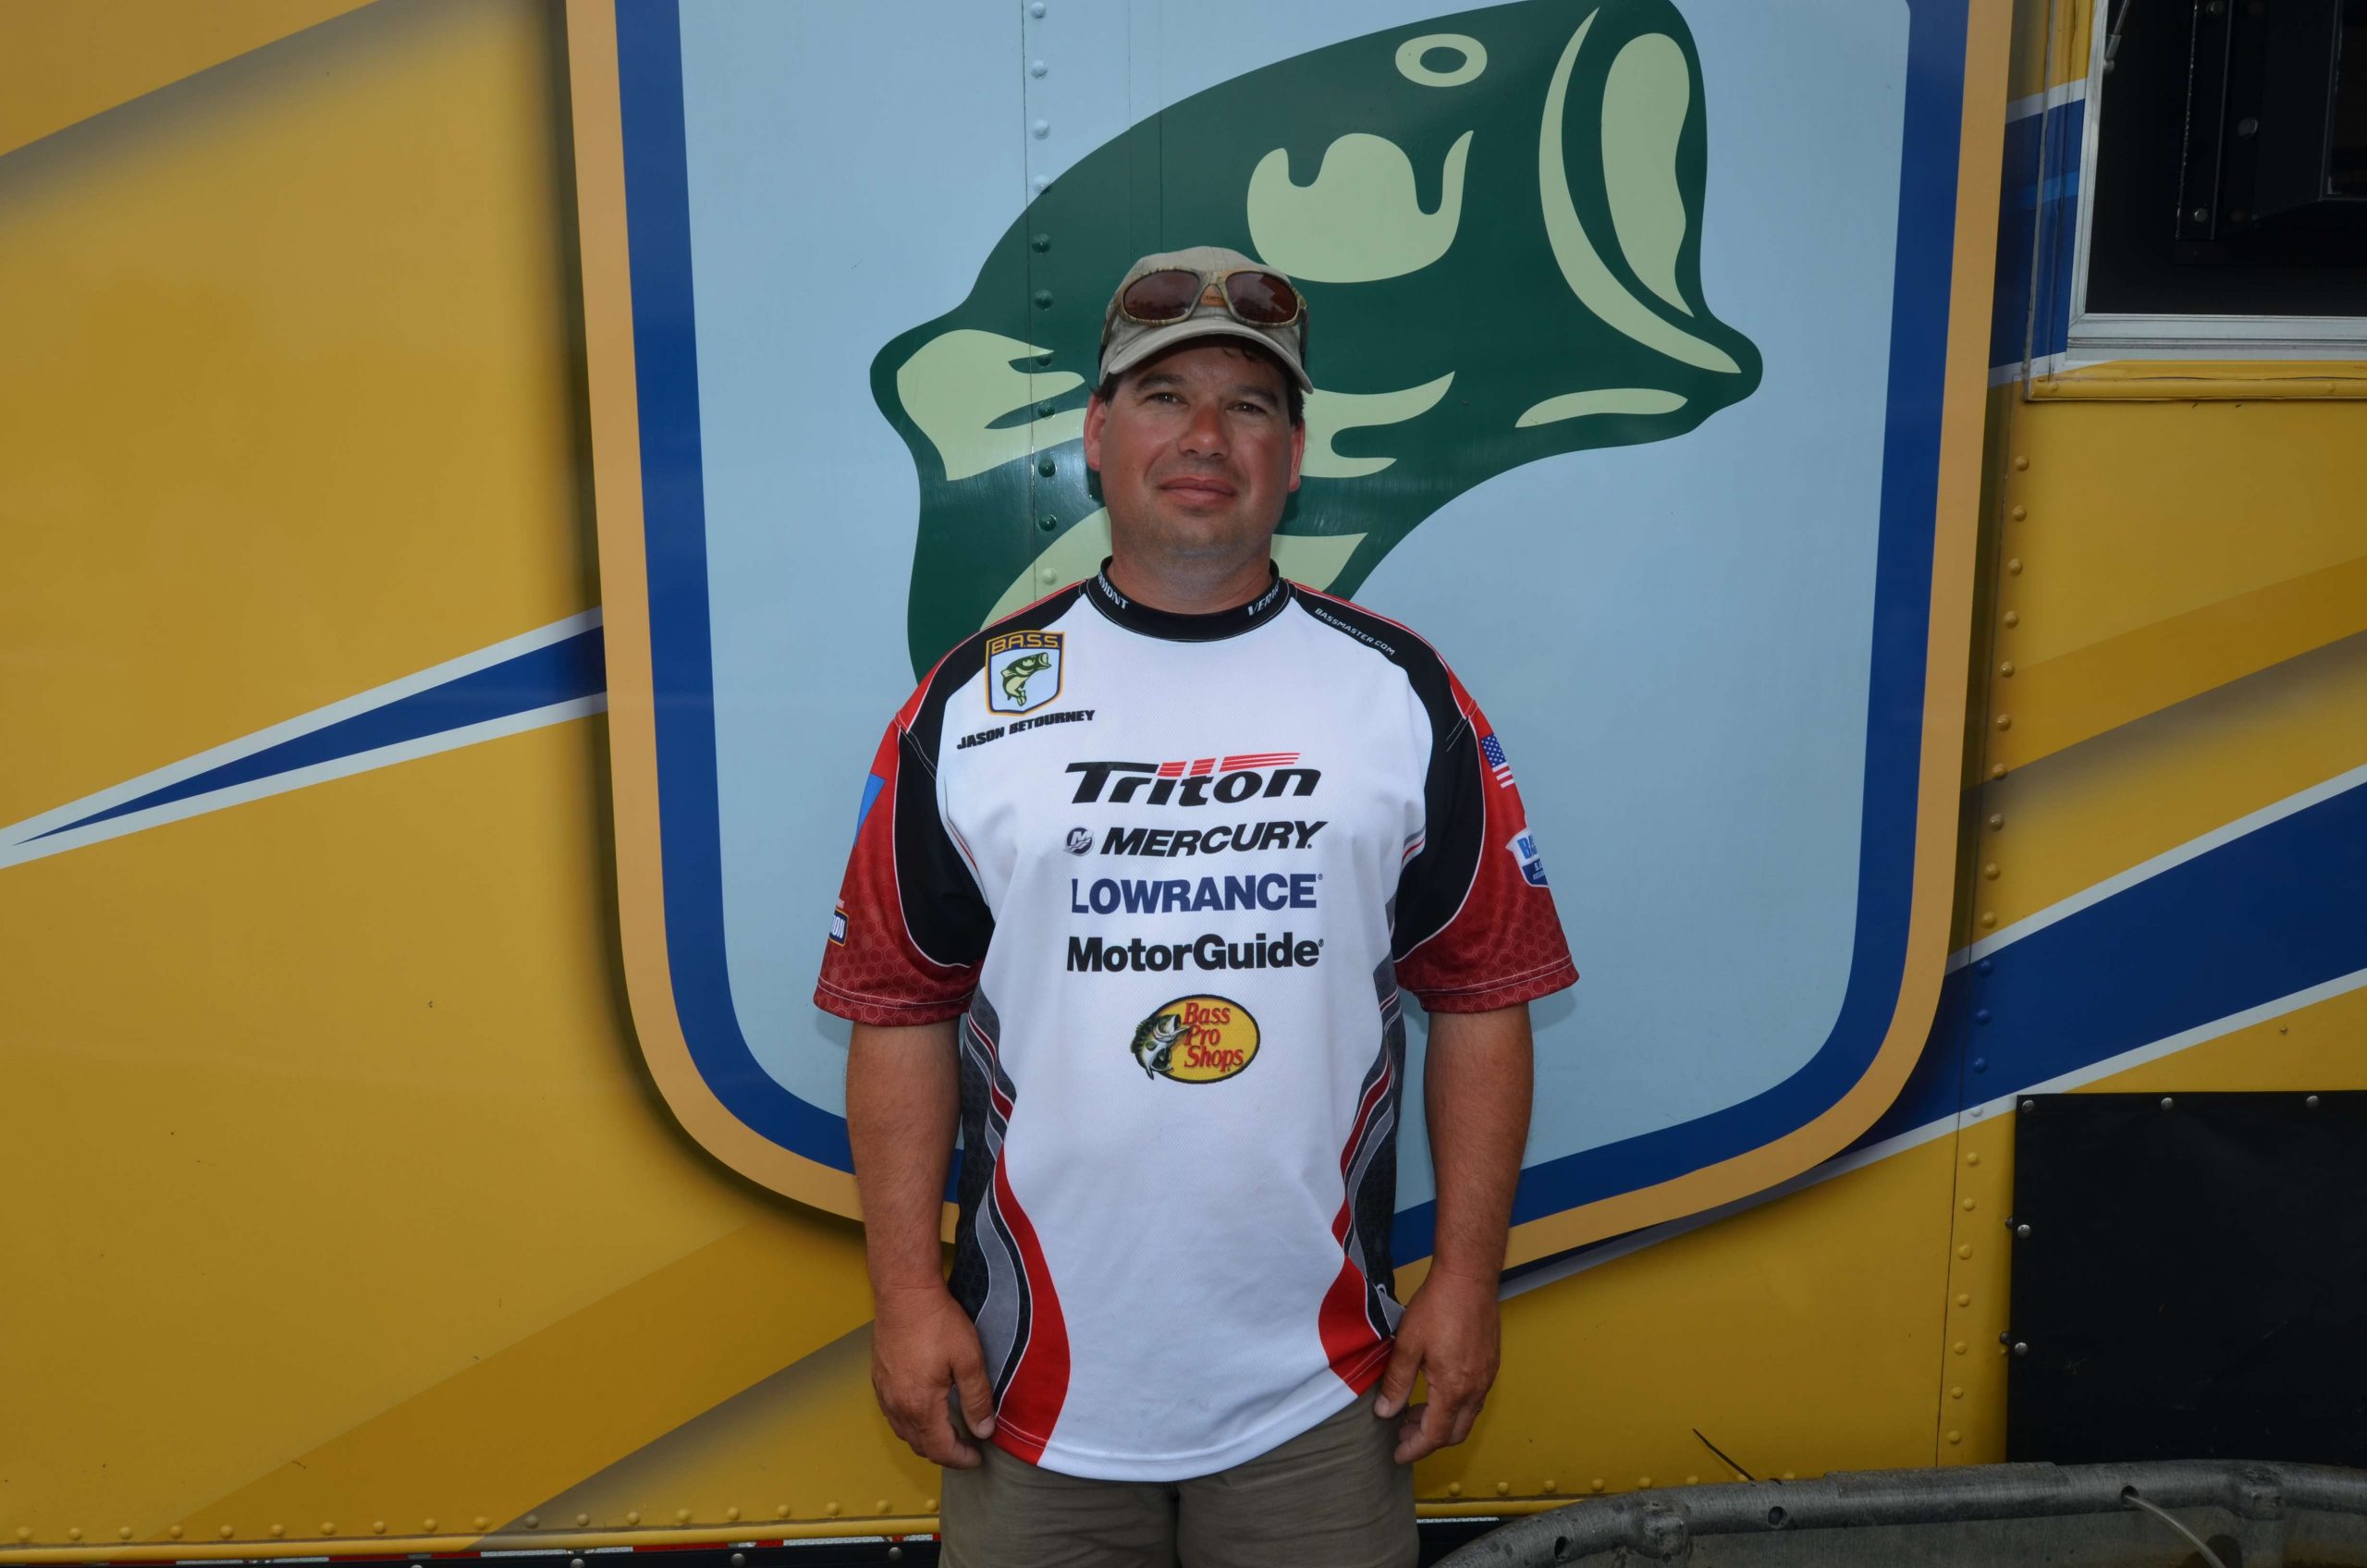 <h4>
Jason Betourney</h4>
Vermont Nonboater<br>
B.A.S.S. Nation Club: Addison Bass Club<BR>
Occupation: Sales and service <BR>
Hobbies: Car shows, RC planes, drag racing<BR>
Sponsors: Eco Pro Tungsten, River2Sea

